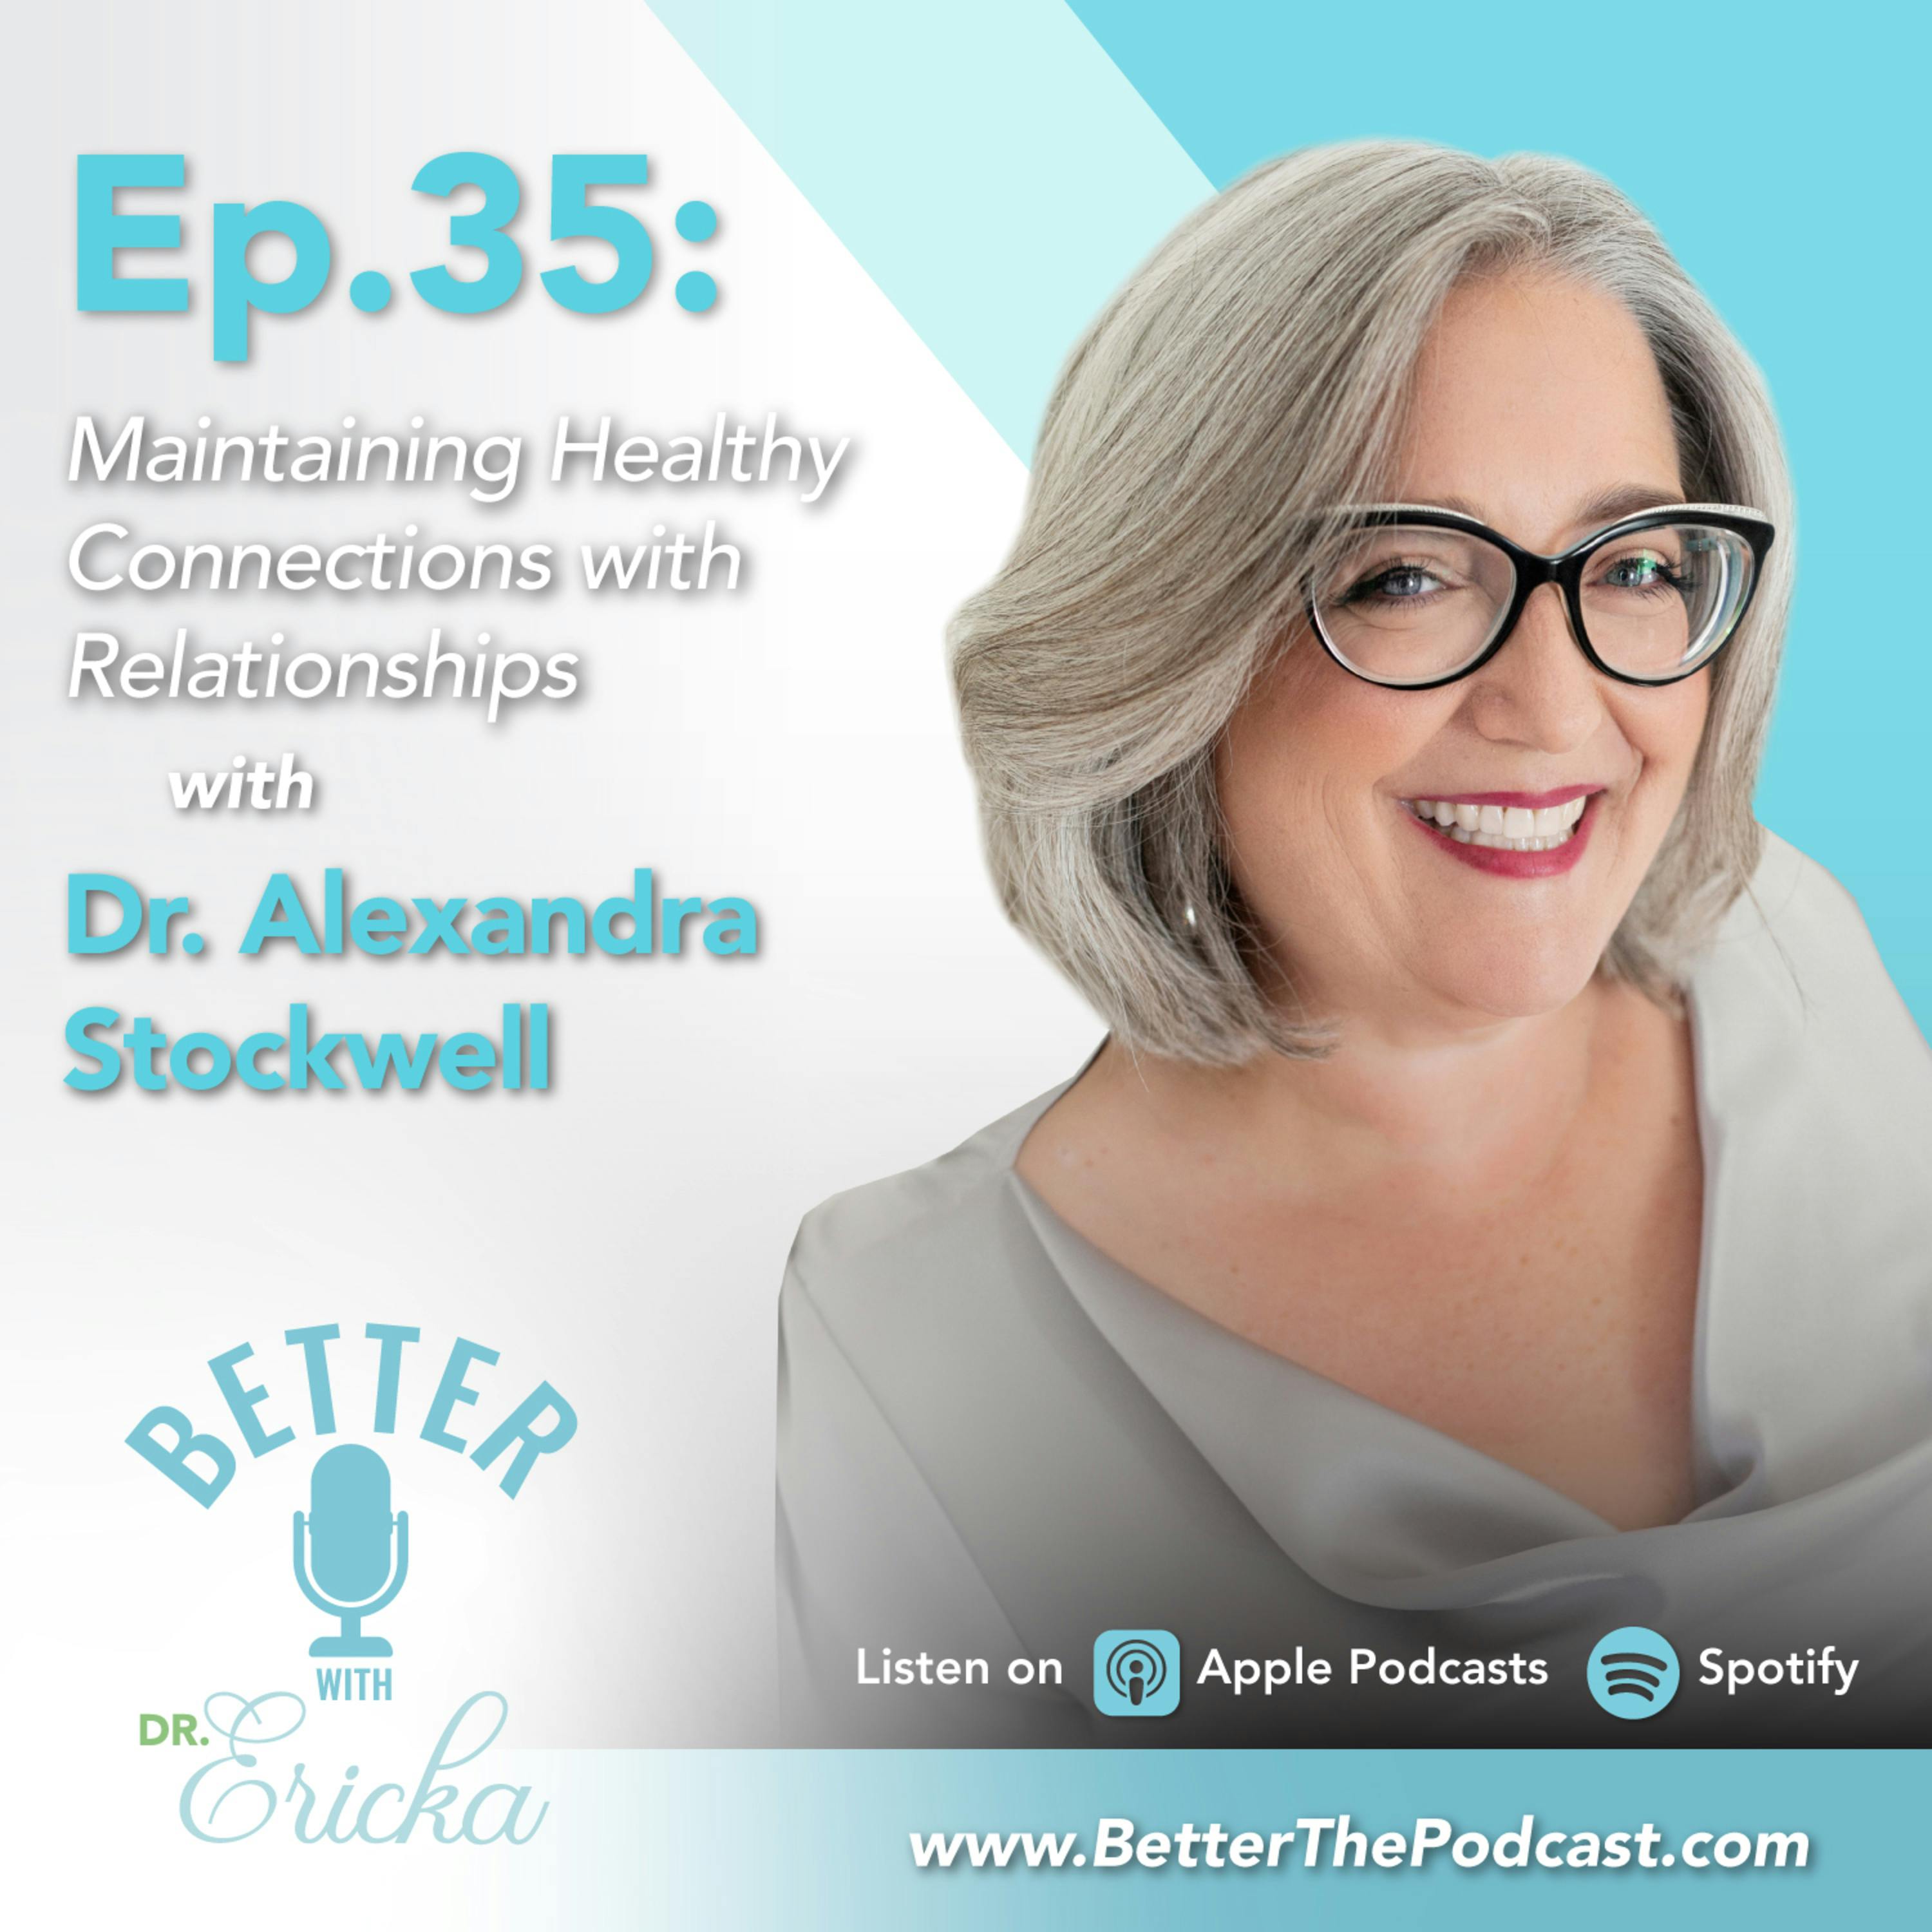 Maintaining Health Connections with Relationships with Dr. Alexandra Stockwell